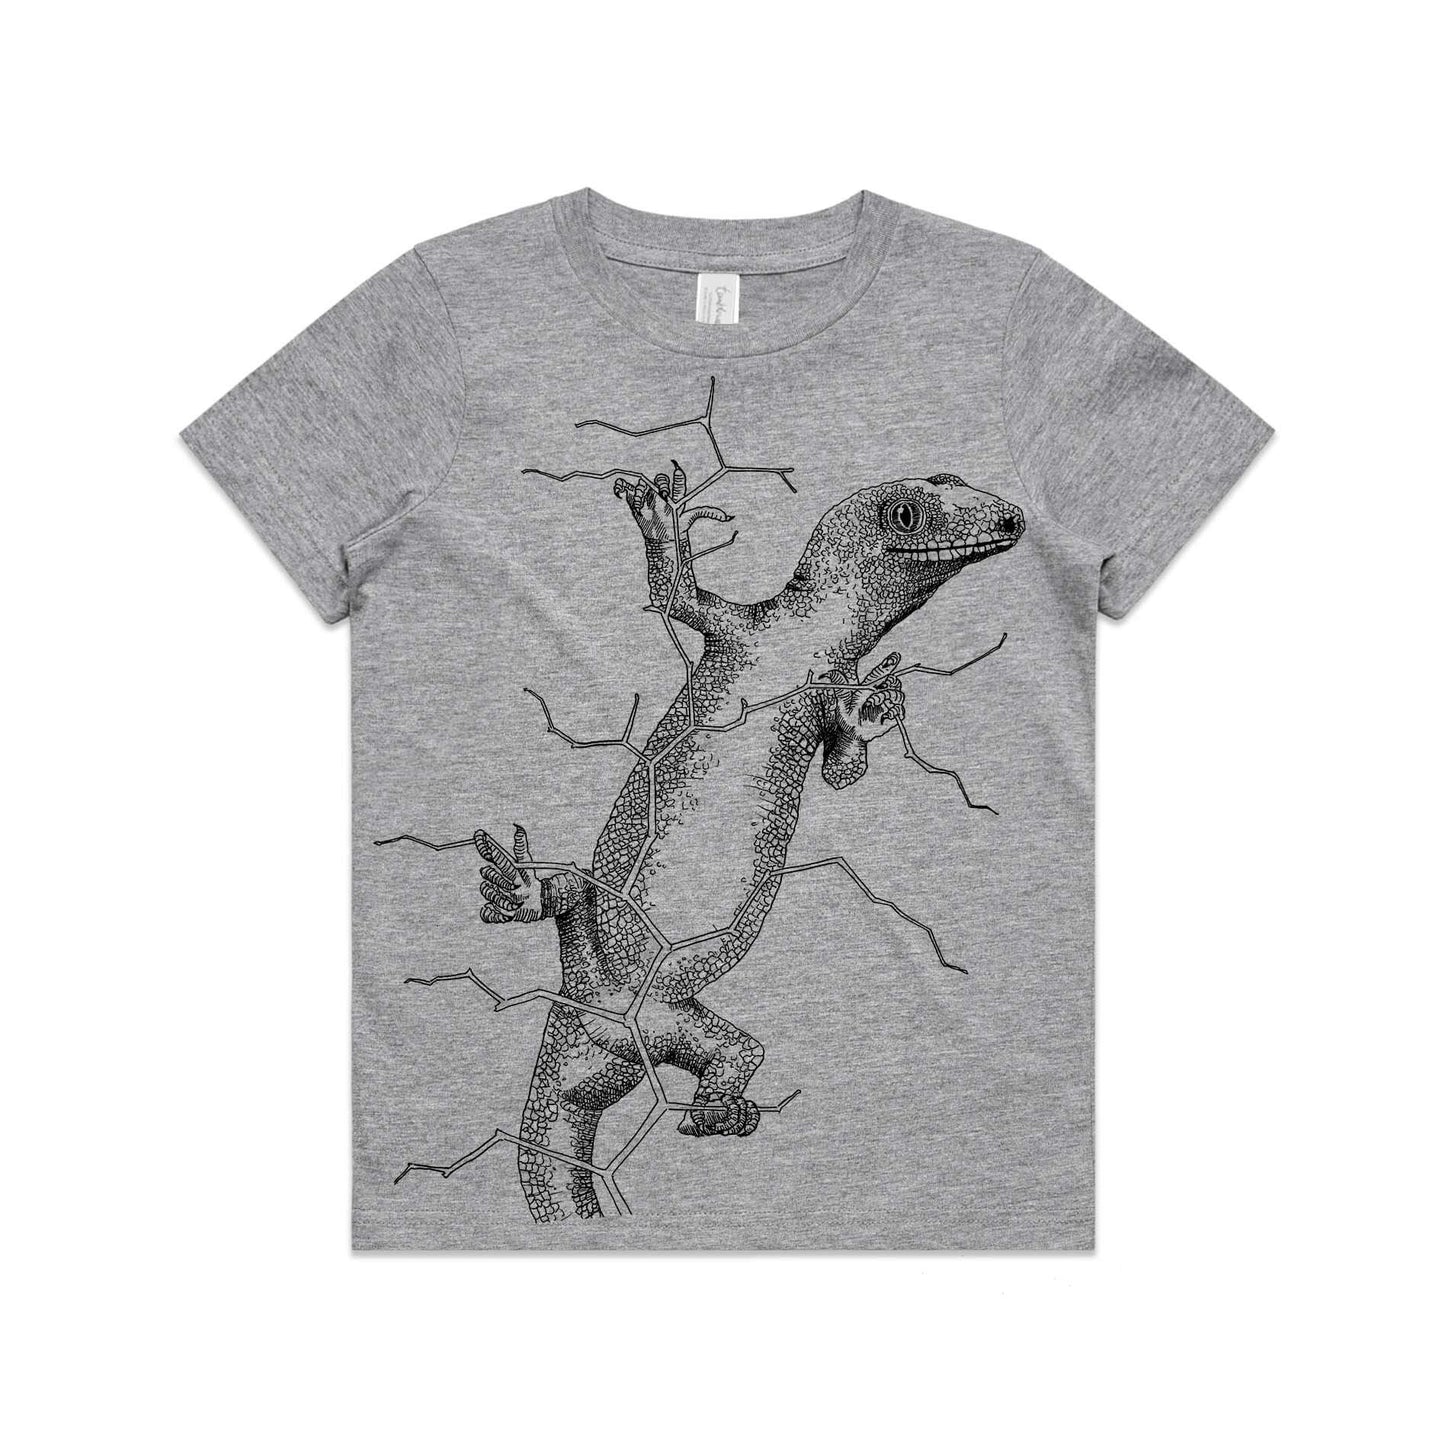 Grey marle, cotton kids' t-shirt with screen printed gecko design.